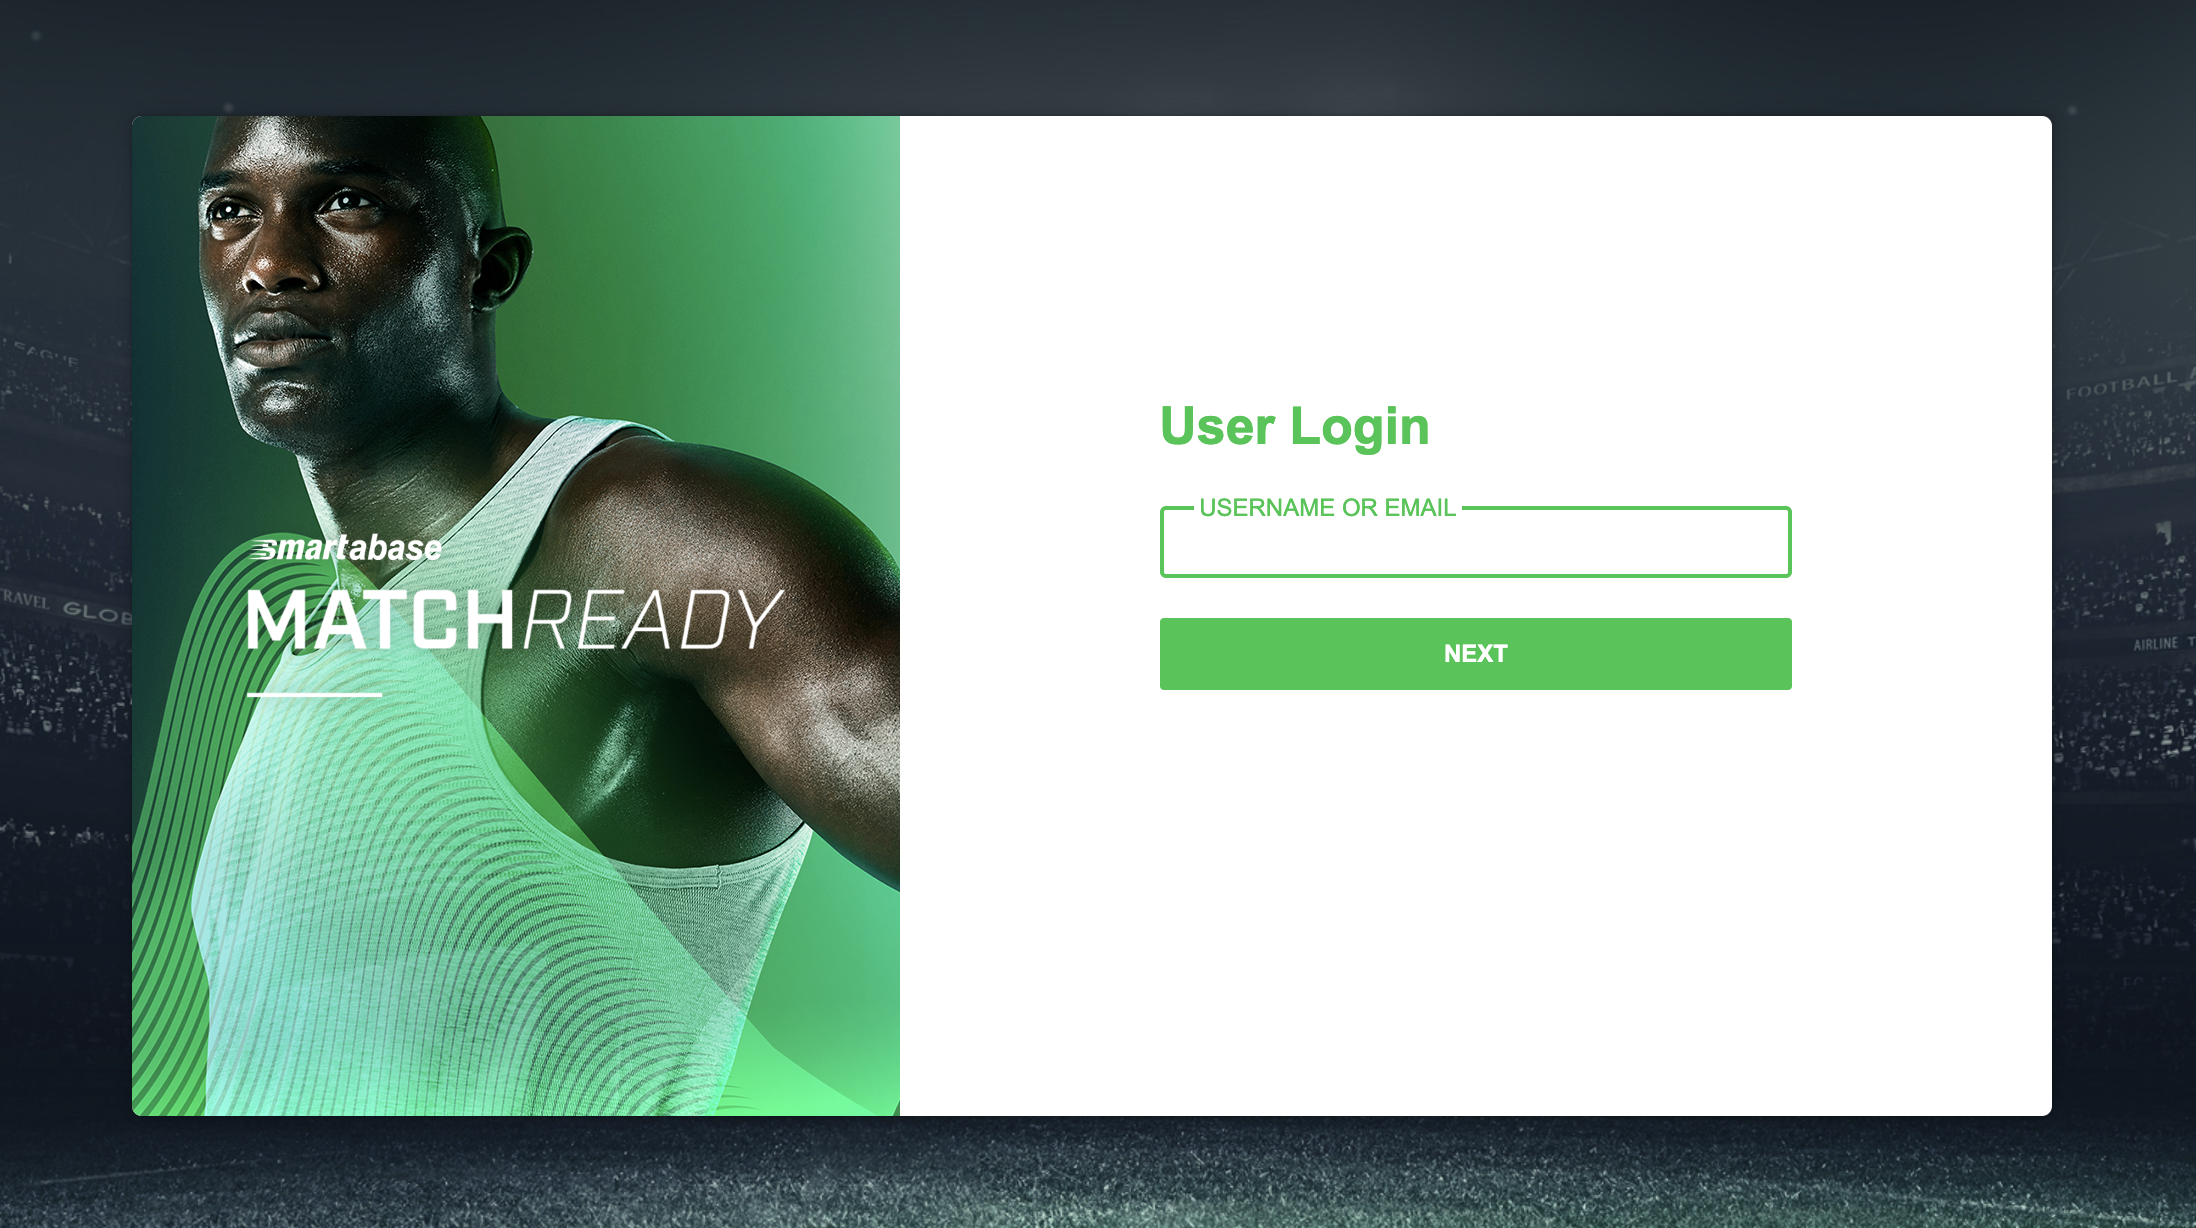 A screenshot showing an example of the login screen for a Smartabase site.